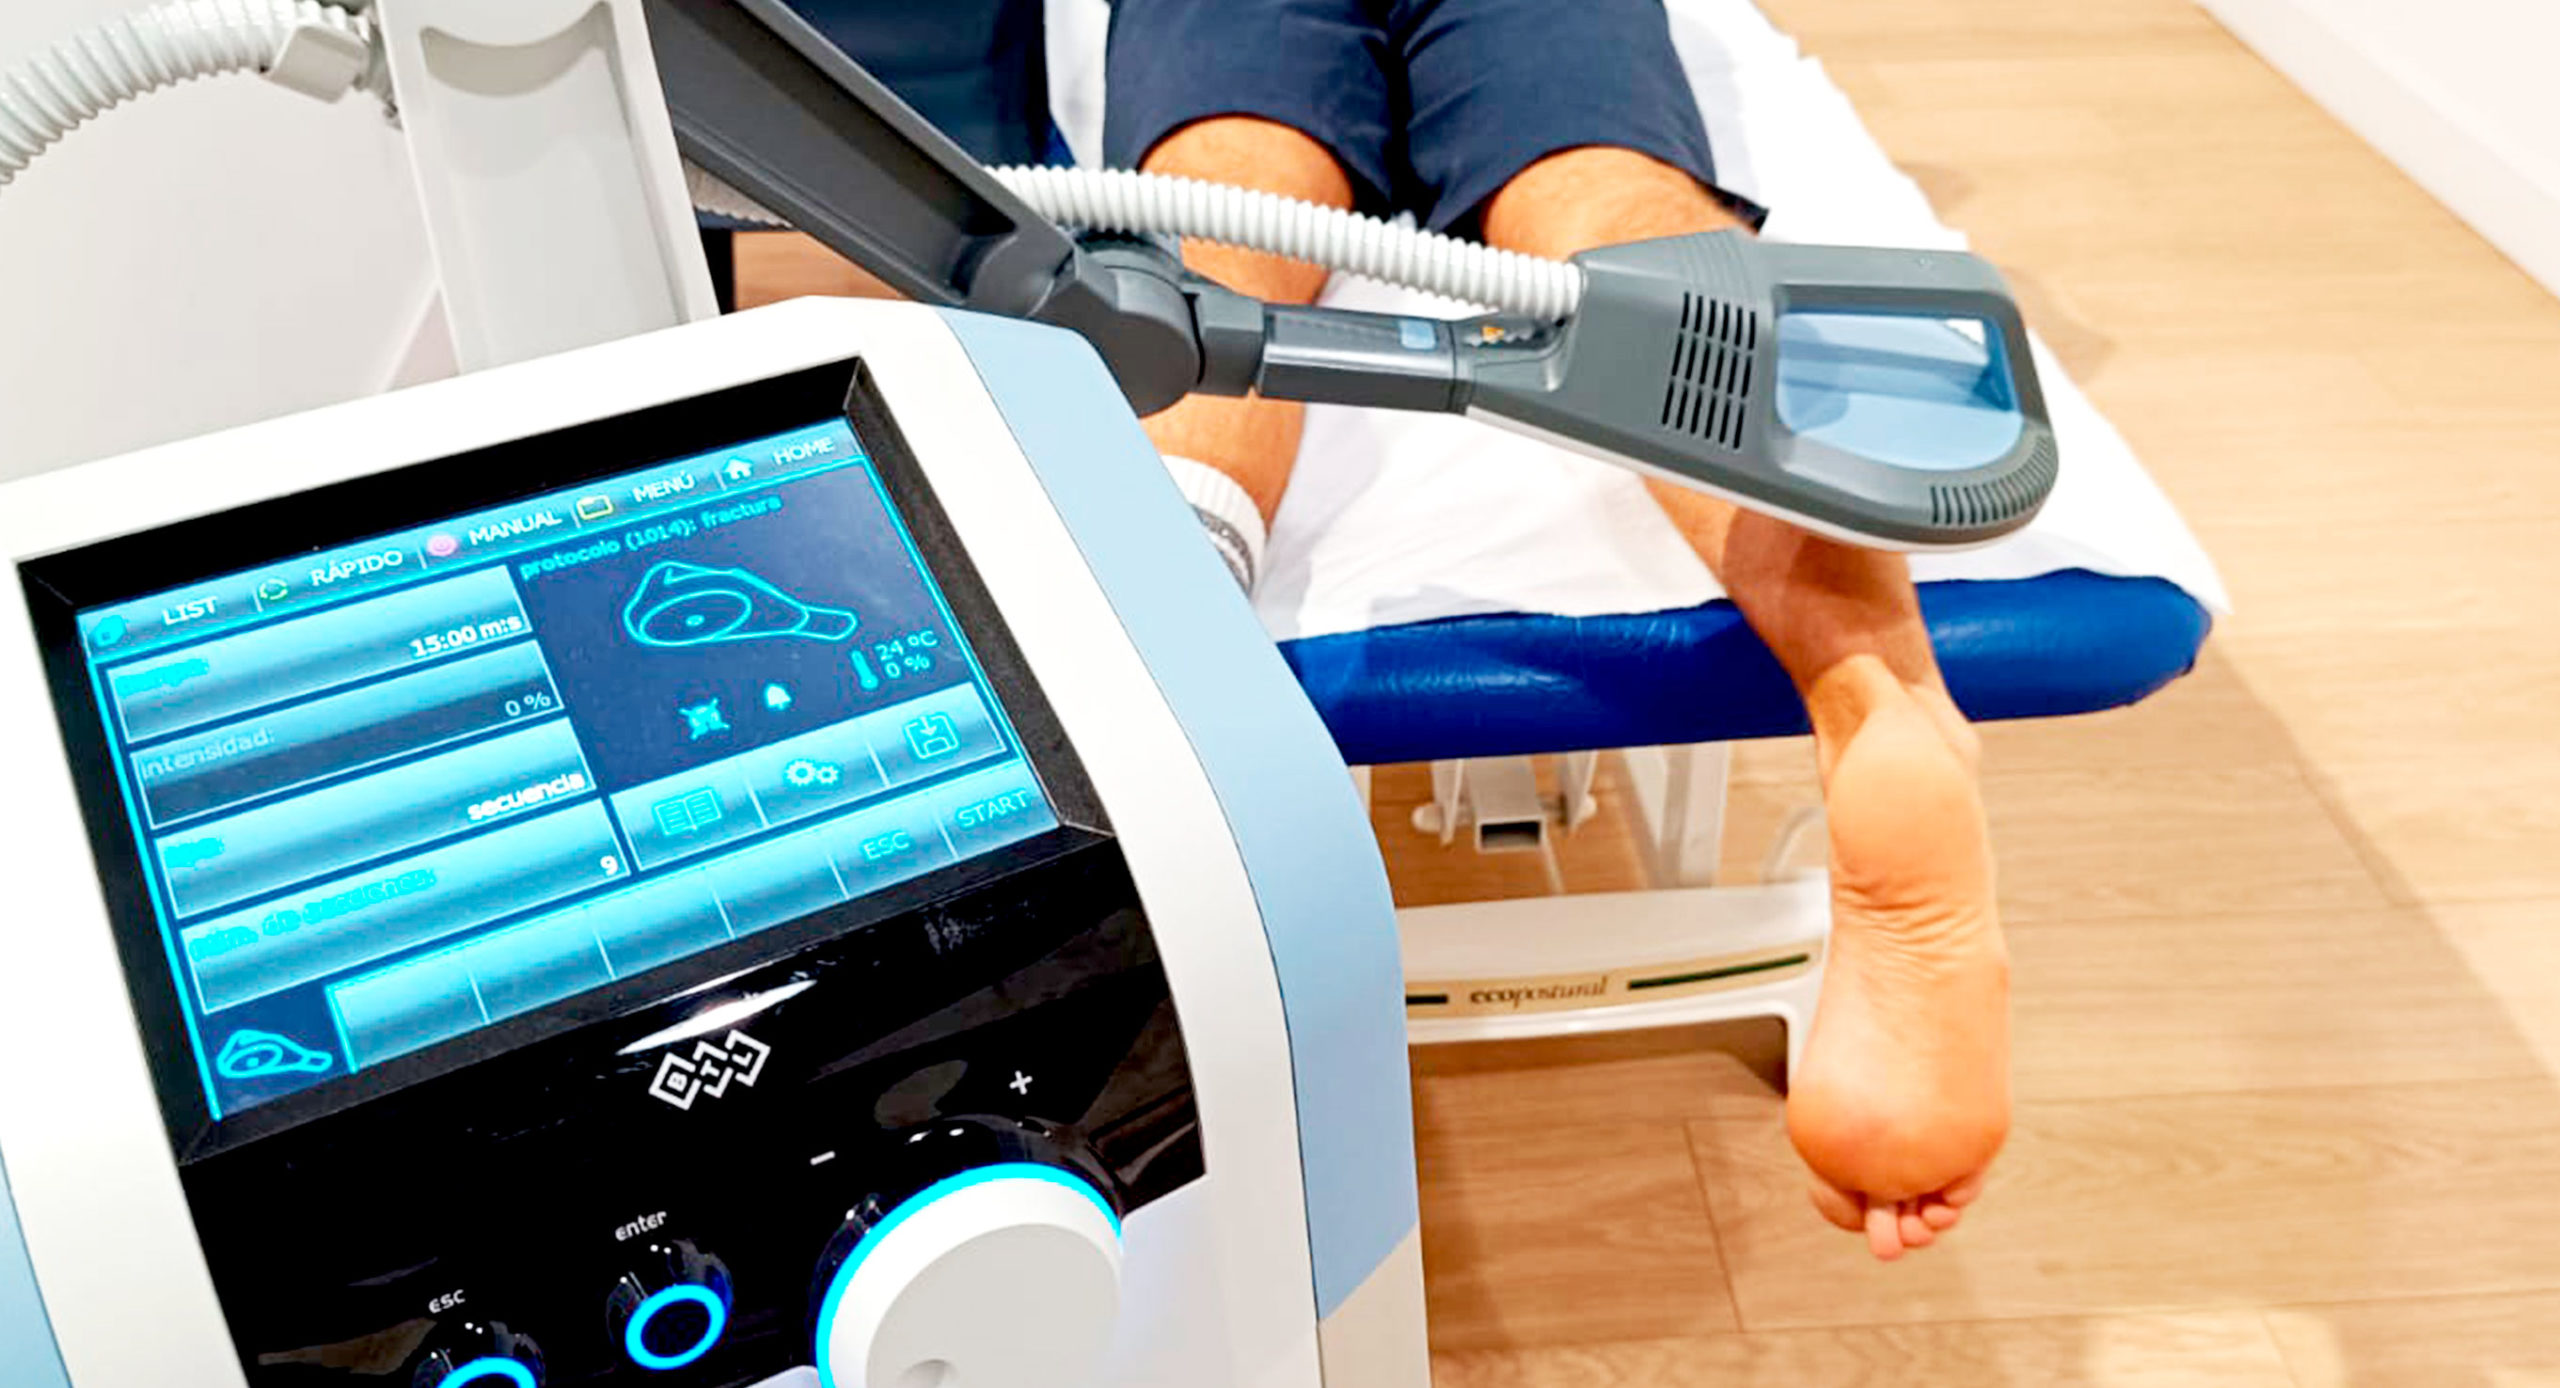 Private physiotherapy session with the super inductive system at AMS Centro medico del ejercicio Málaga